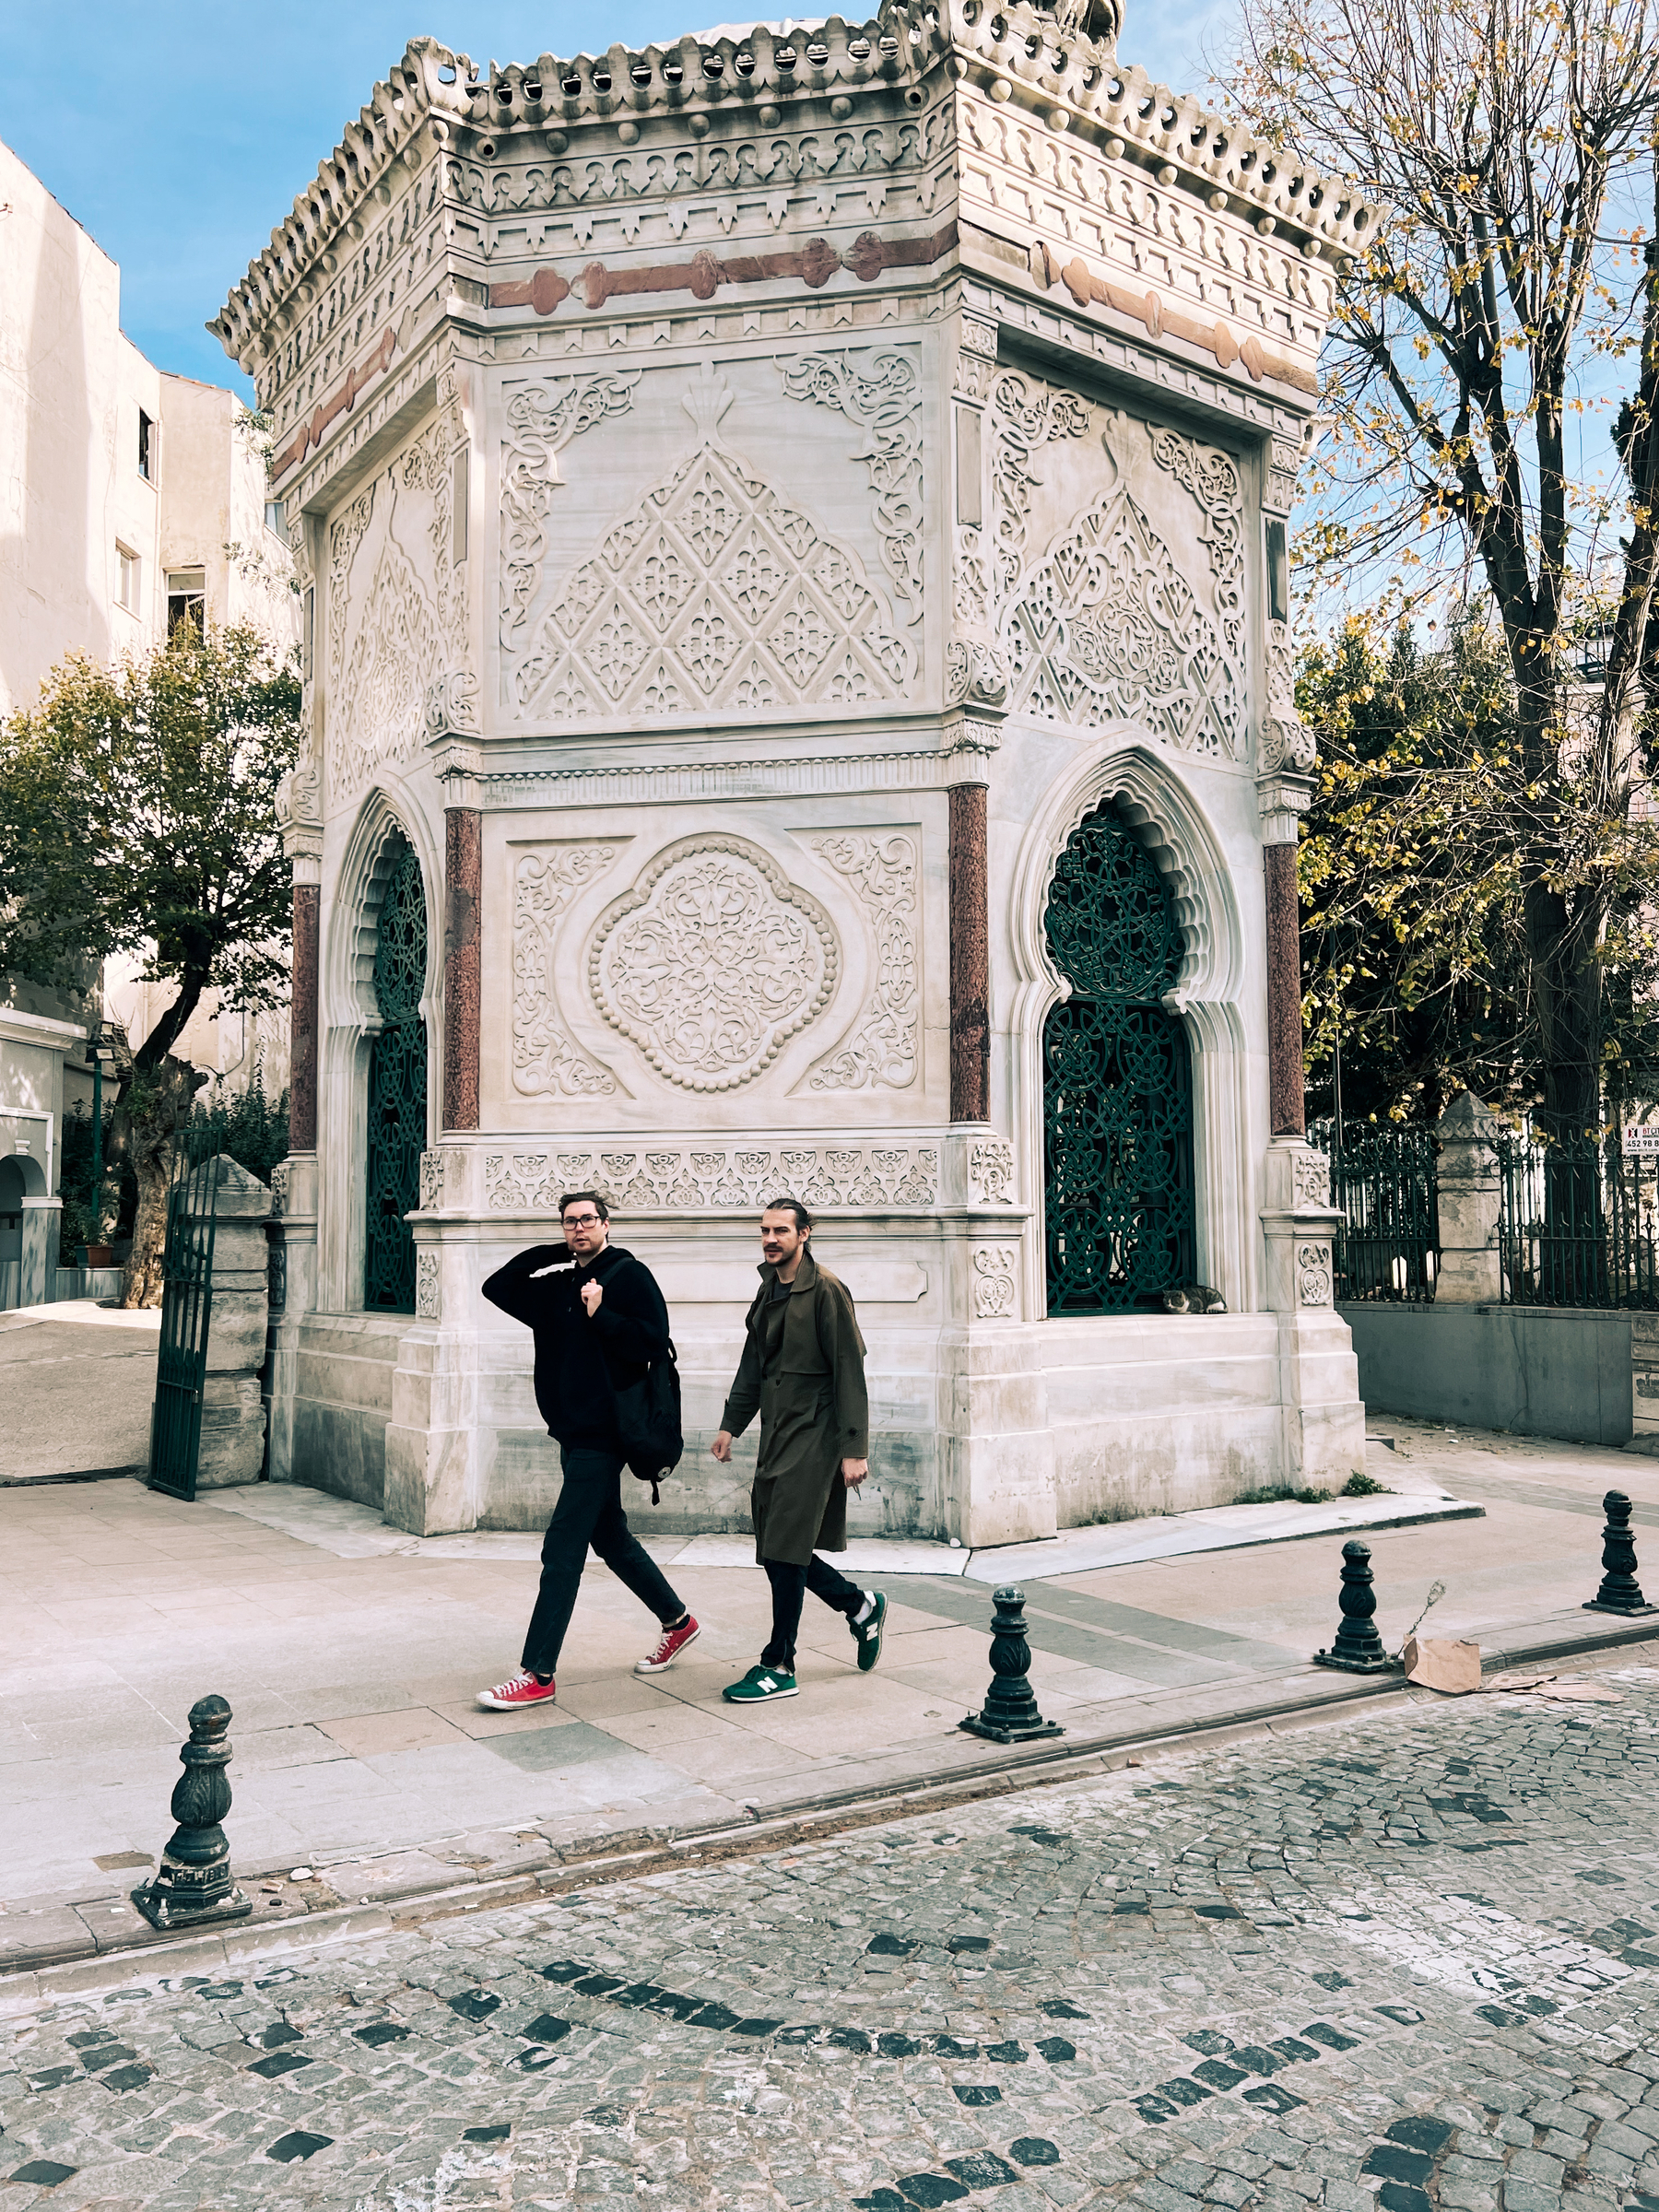 Two men walking past an ornate historic building with intricate patterns and a pointed archway.